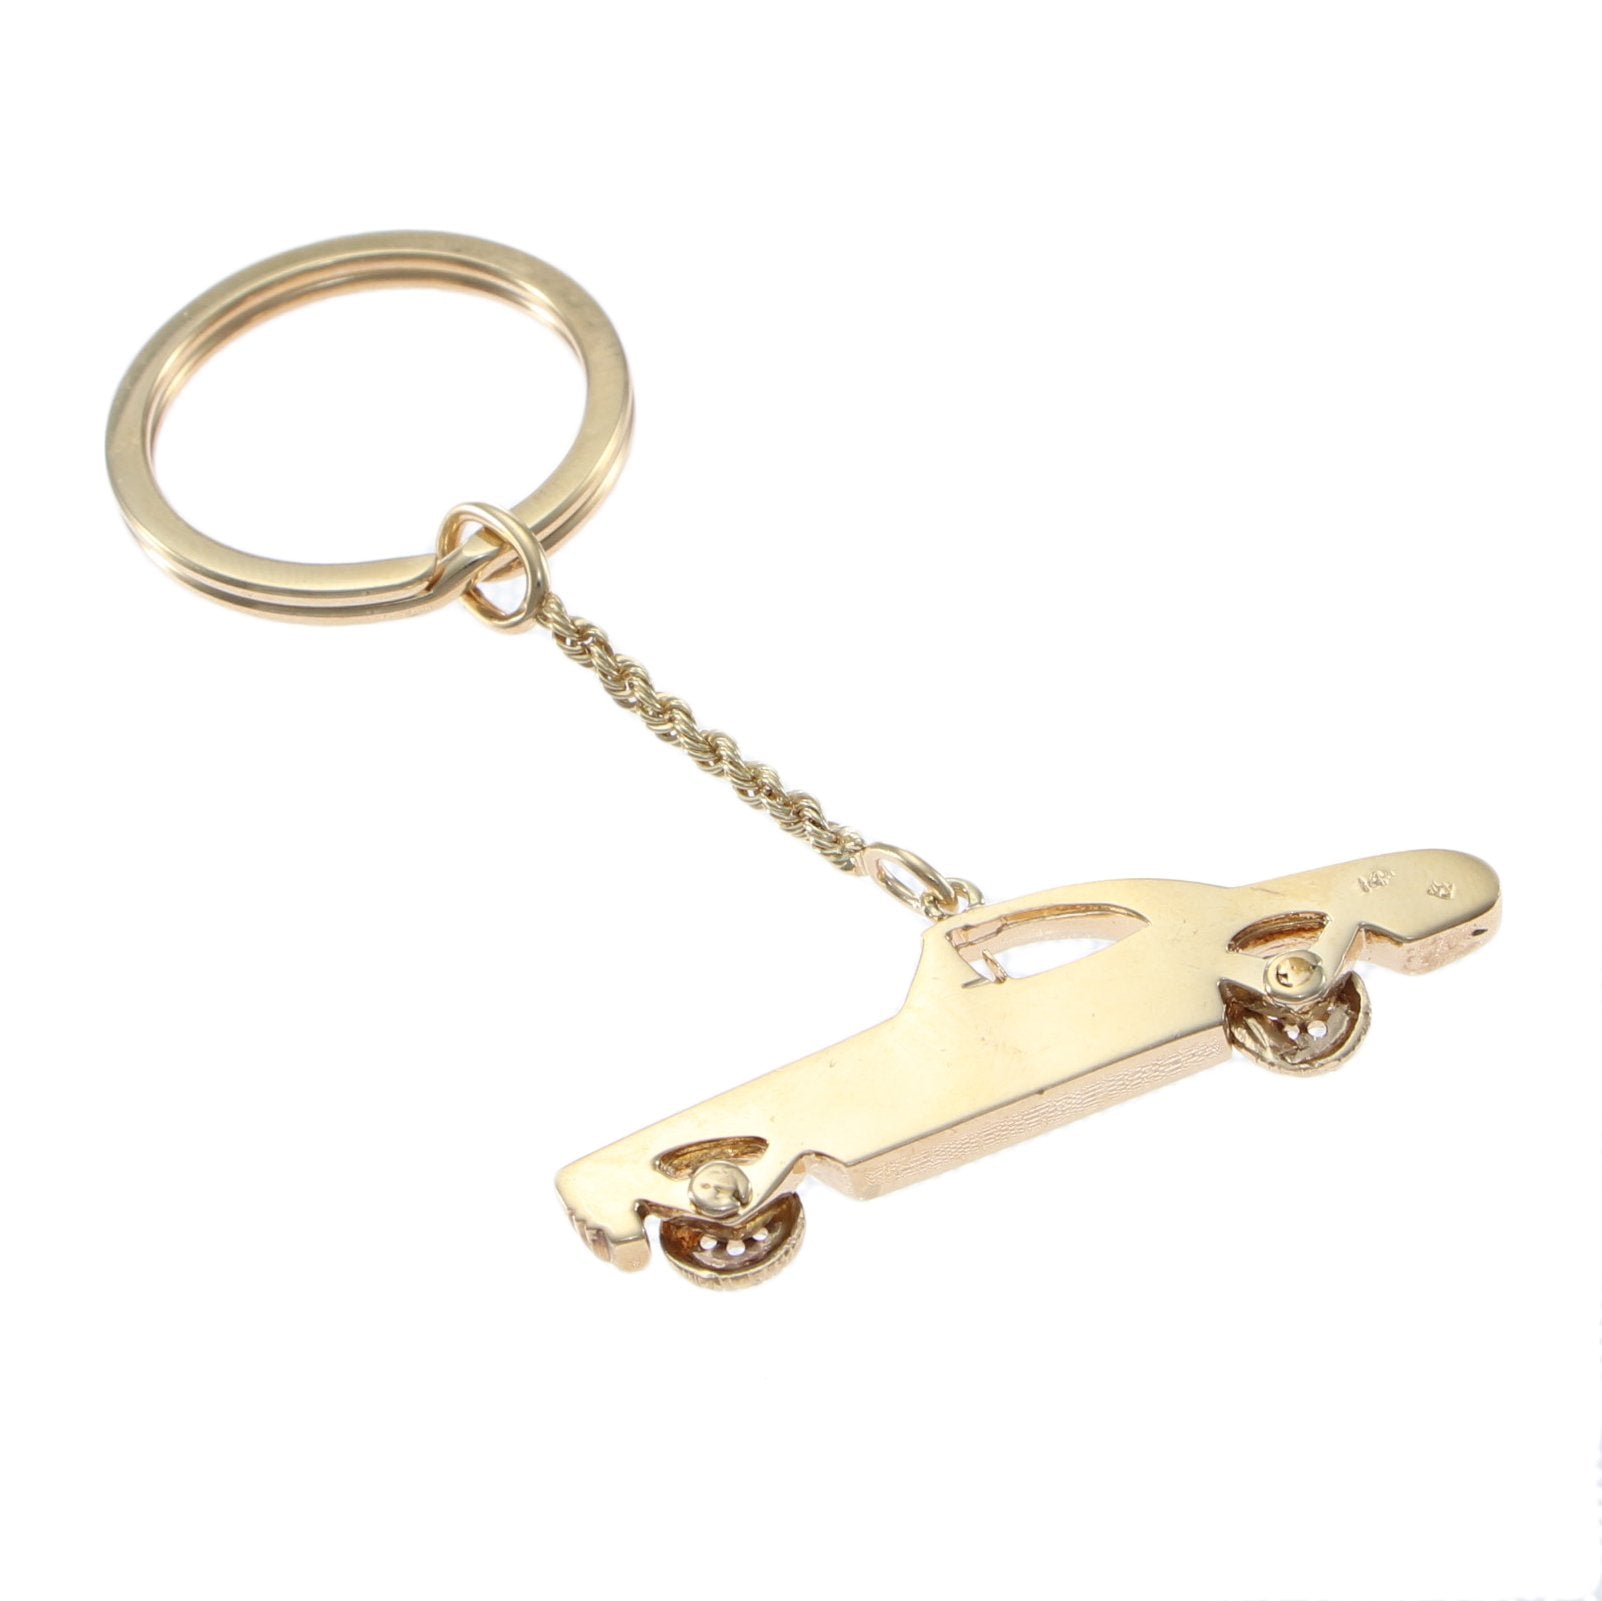 Buy Car Keychain Accessories with Key Ring & Anti-Lost D-Ring Key Chain  Holder Clip for Men and Women, ​Metal Keychain Car Fob Online - Shop  Automotive on Carrefour UAE